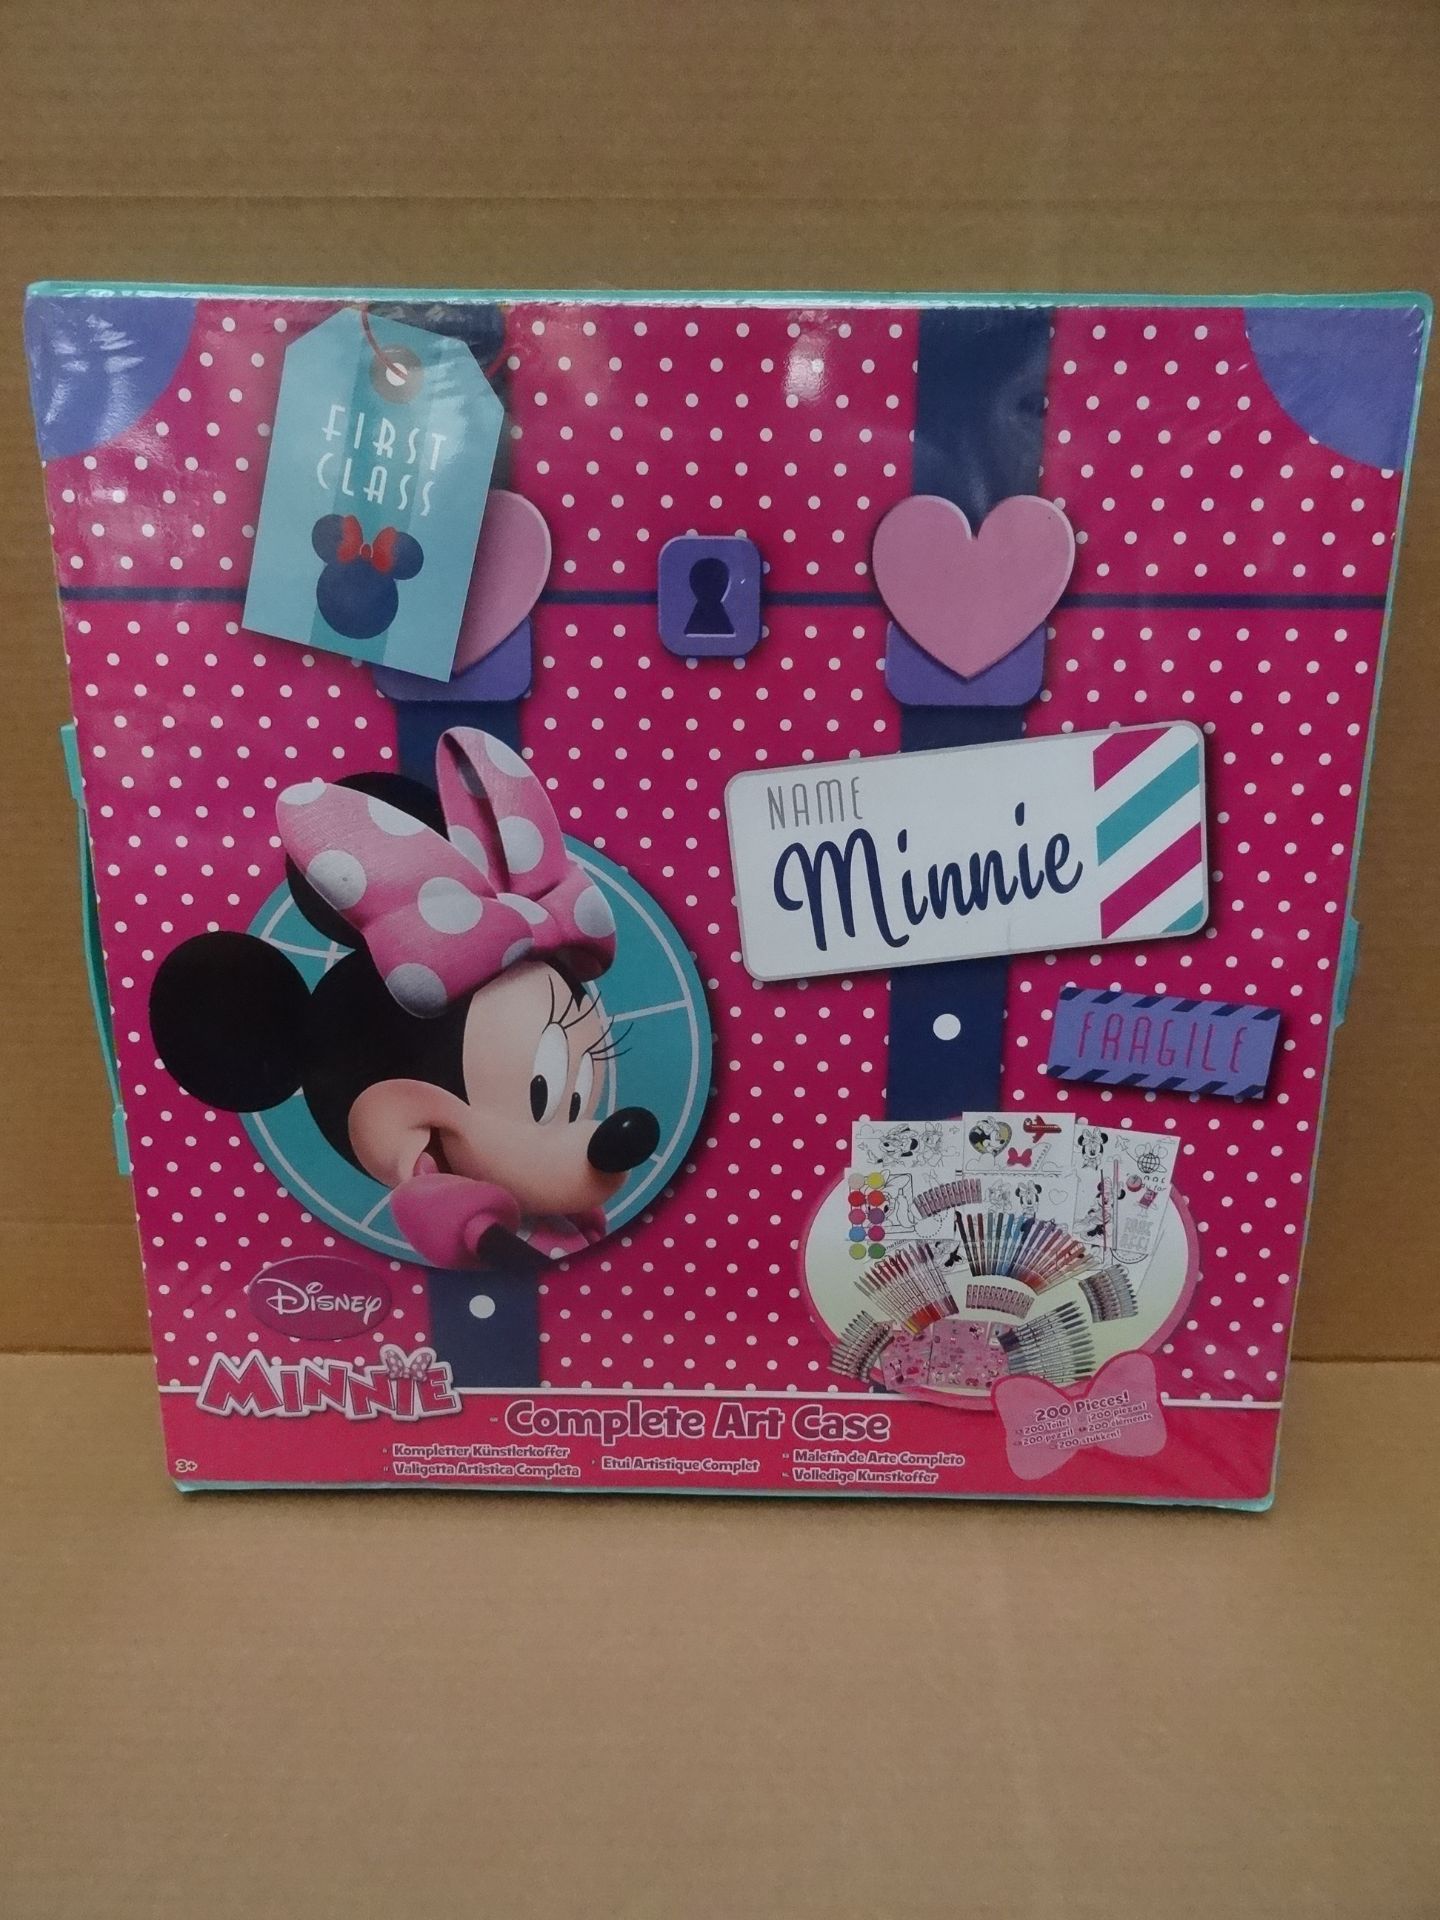 12 x Disney Minnie Mouse 200 Piece Mega Extra Large Complete Art Cases! Each Includes: 24 Crayons,